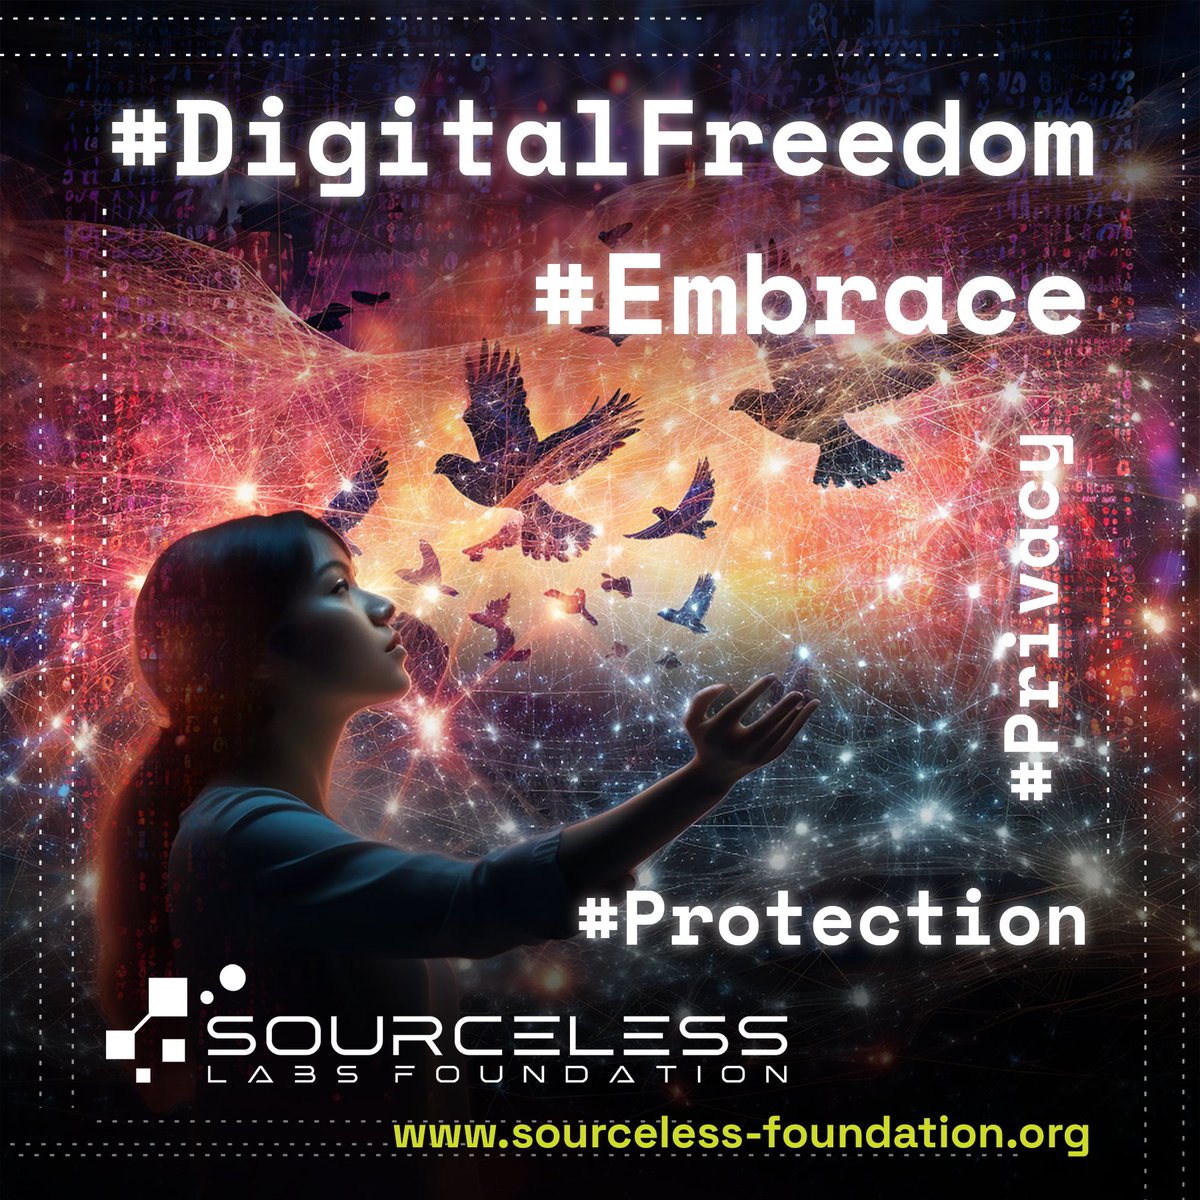 #DigitalFreedom starts with YOU! 🌎

SourceLess Labs Foundation empowers you to control your data & access information freely. 📚

Join the movement for a more open & secure digital world:
sourceless-foundation.org

#PrivacyMatters